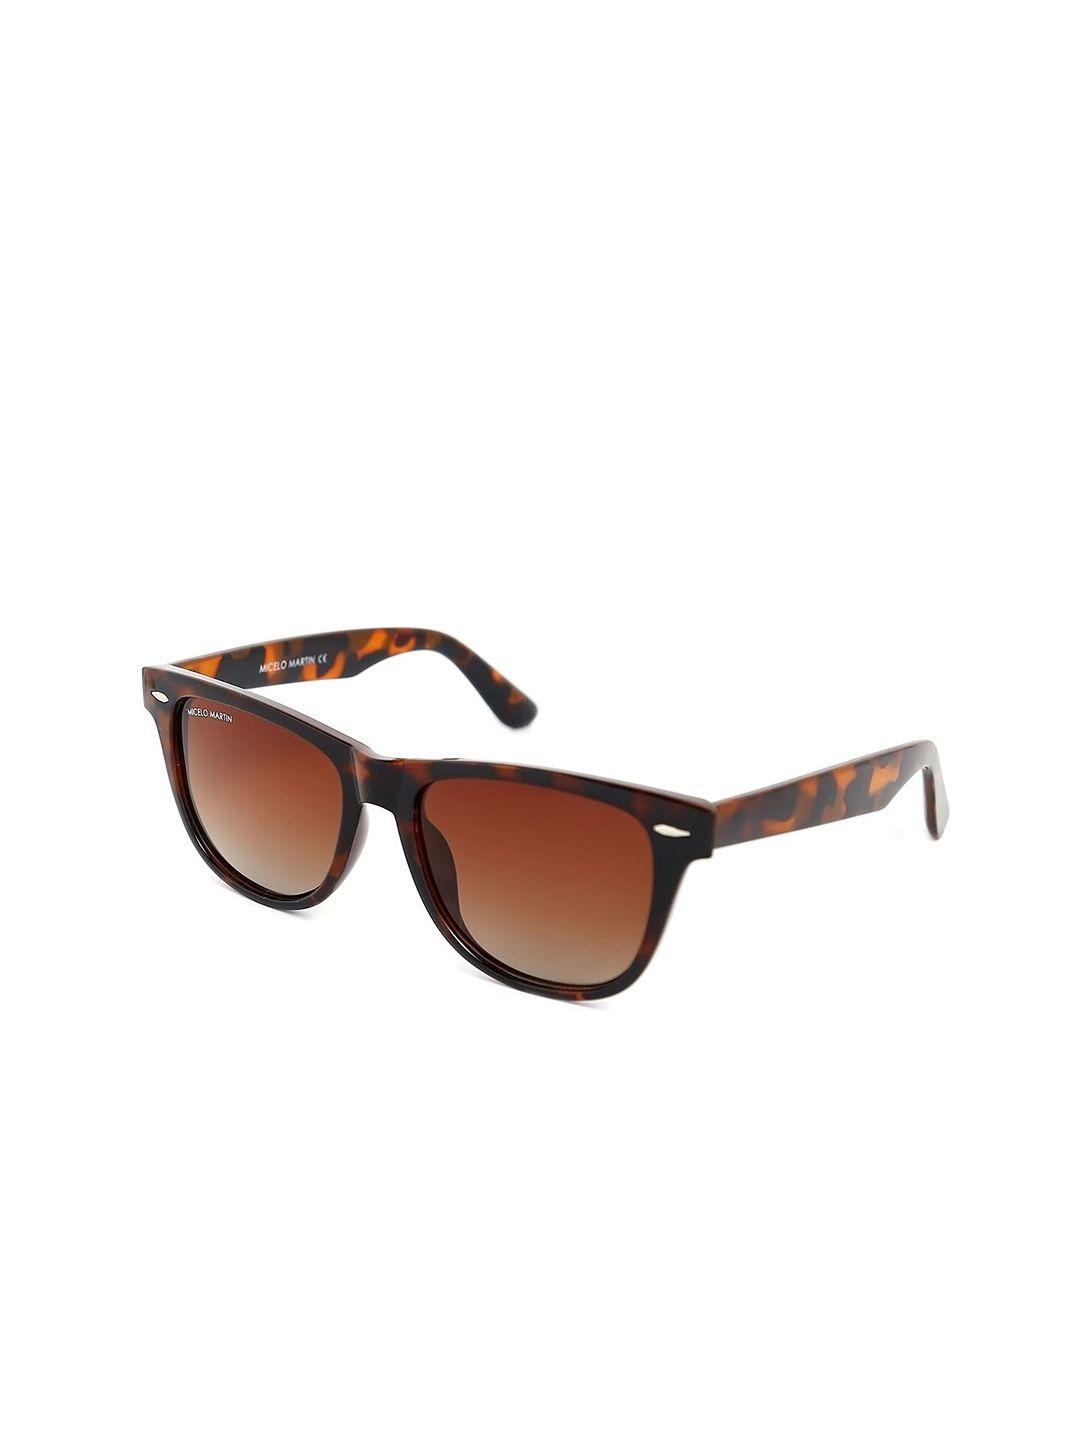 micelo martin unisex brown lens & black square sunglasses with uv protected lens mm2001 c4